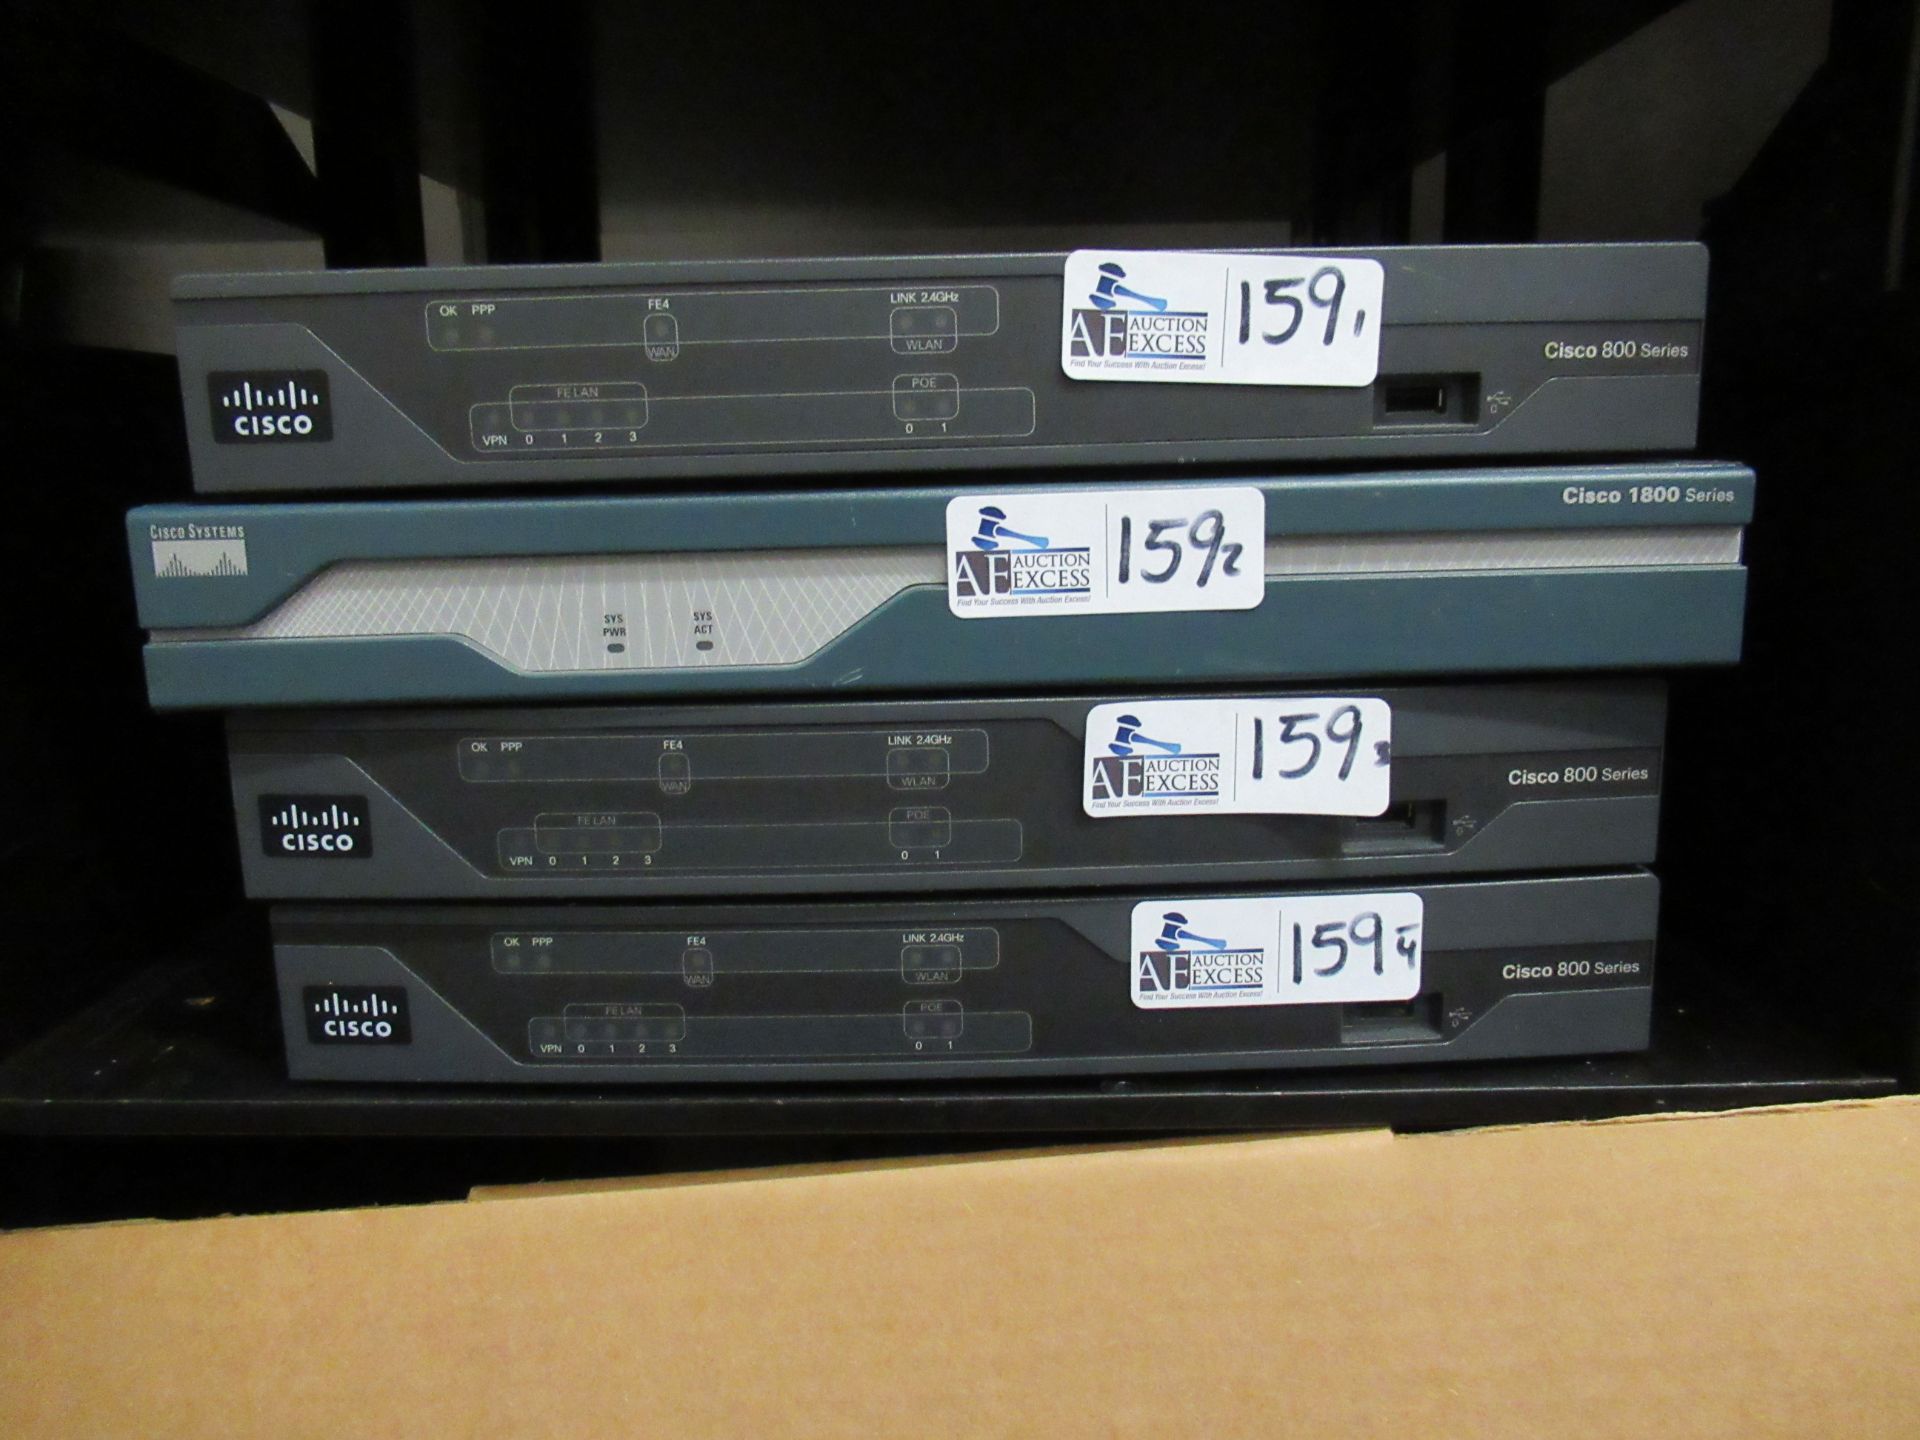 Lot of 4 Cisco 800 and 1800